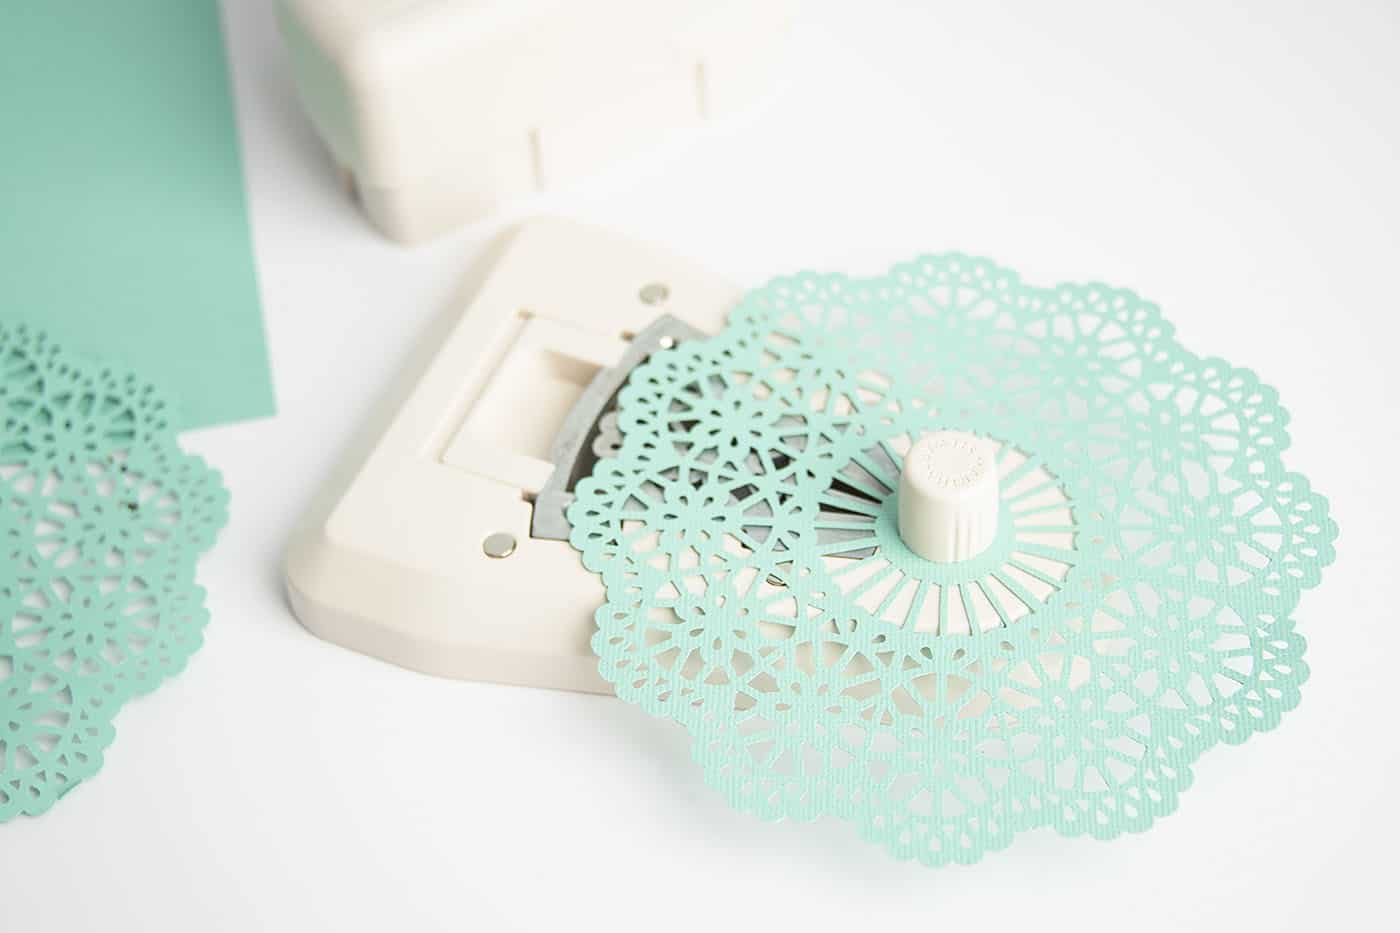 Cutting paper with a doily punch from scrapbook paper